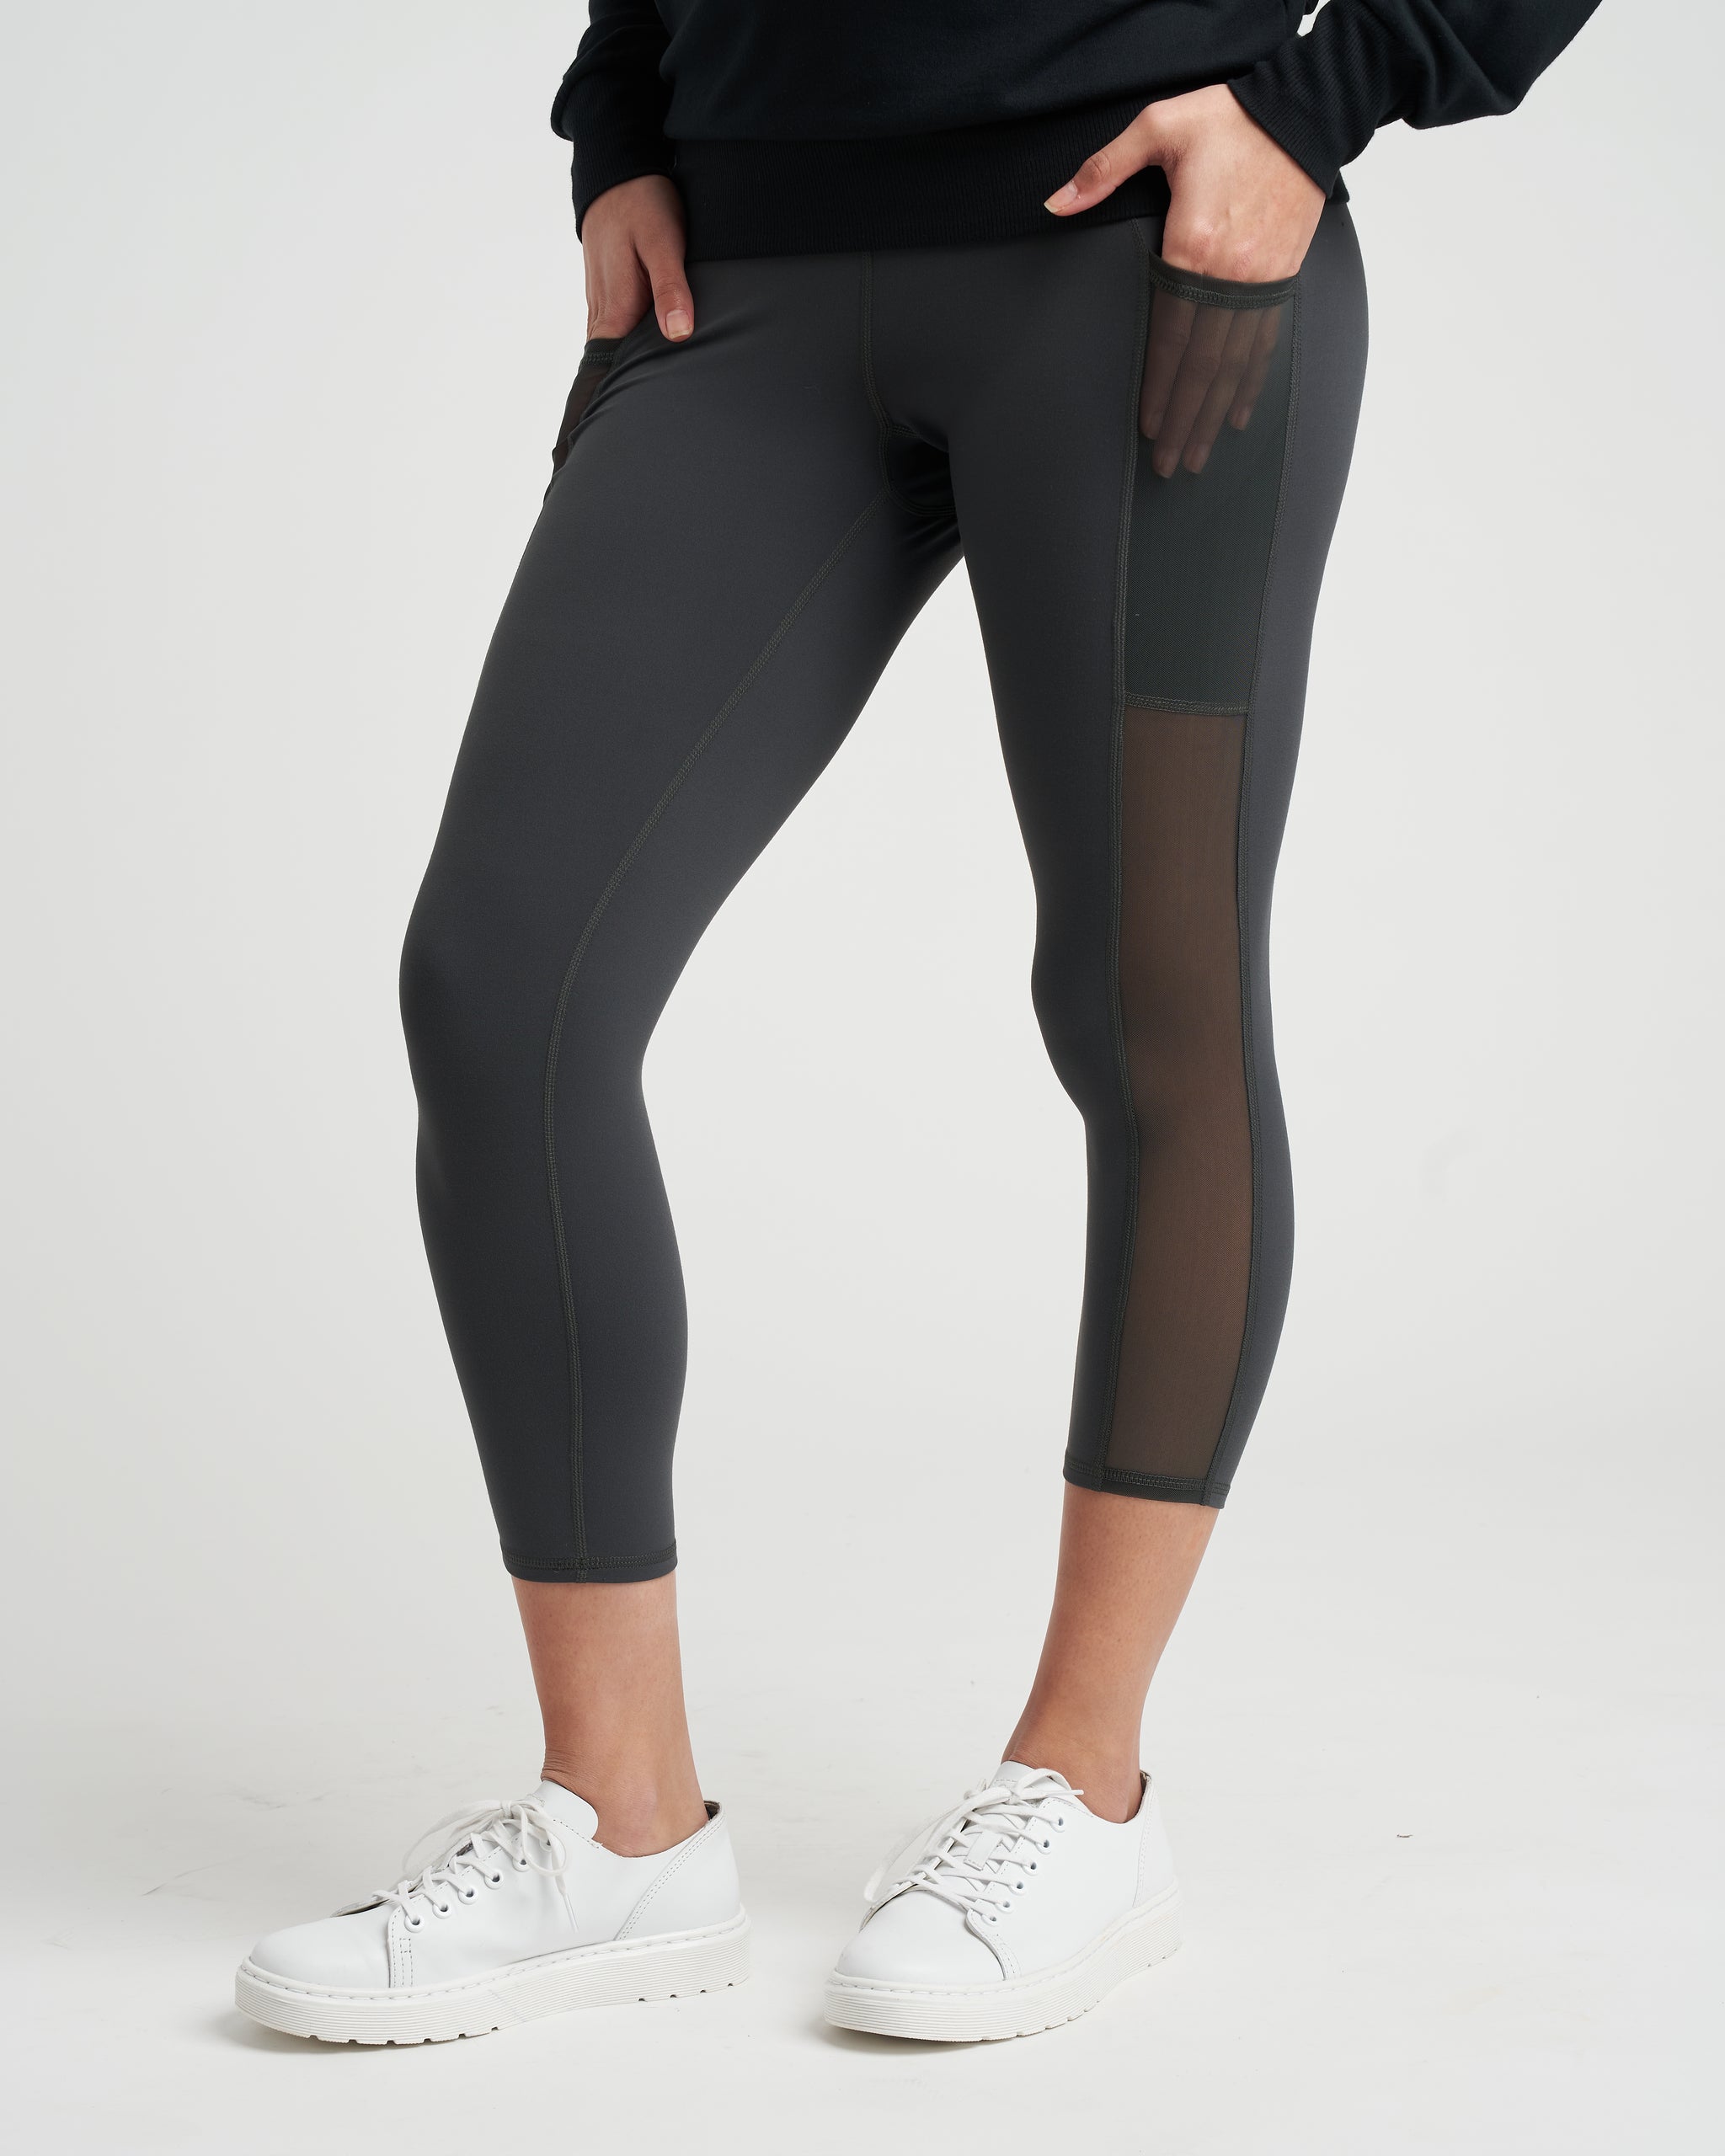 High-Waisted Mesh Panel Leggings Clothing in Black - Get great